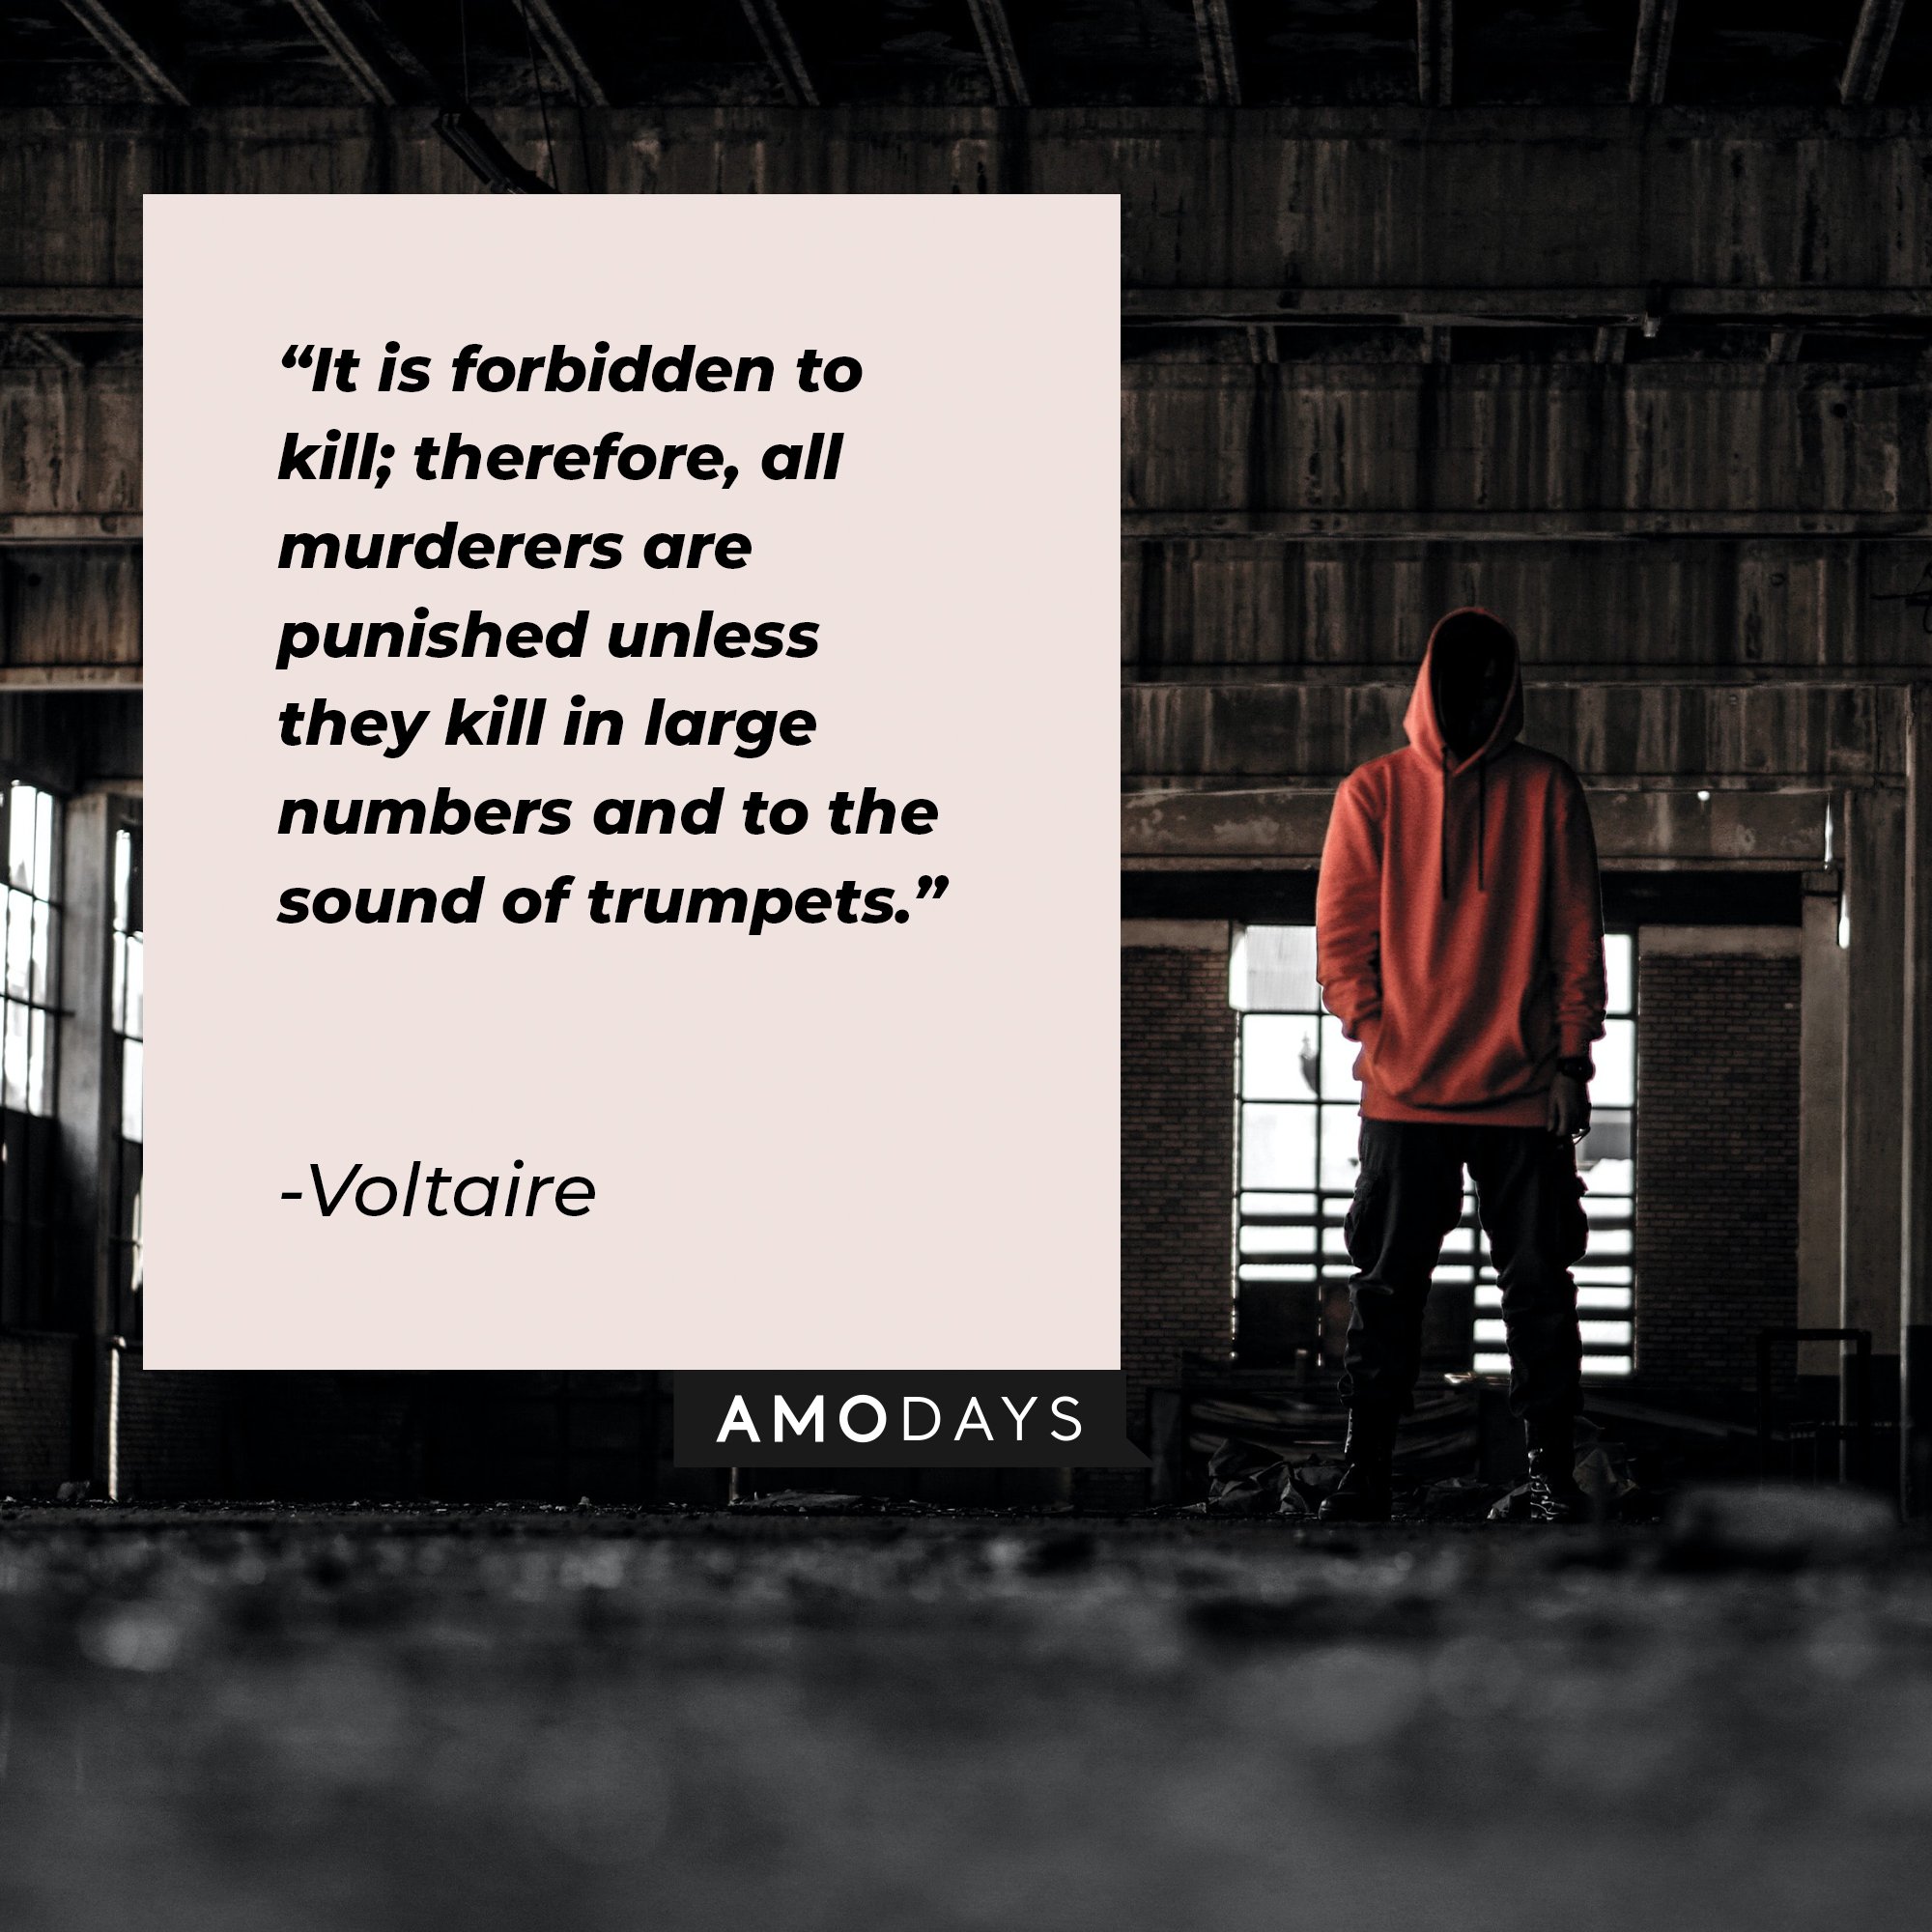 Voltaire’s quote: "It is forbidden to kill; therefore, all murderers are punished unless they kill in large numbers and to the sound of trumpets." | Image: AmoDays  